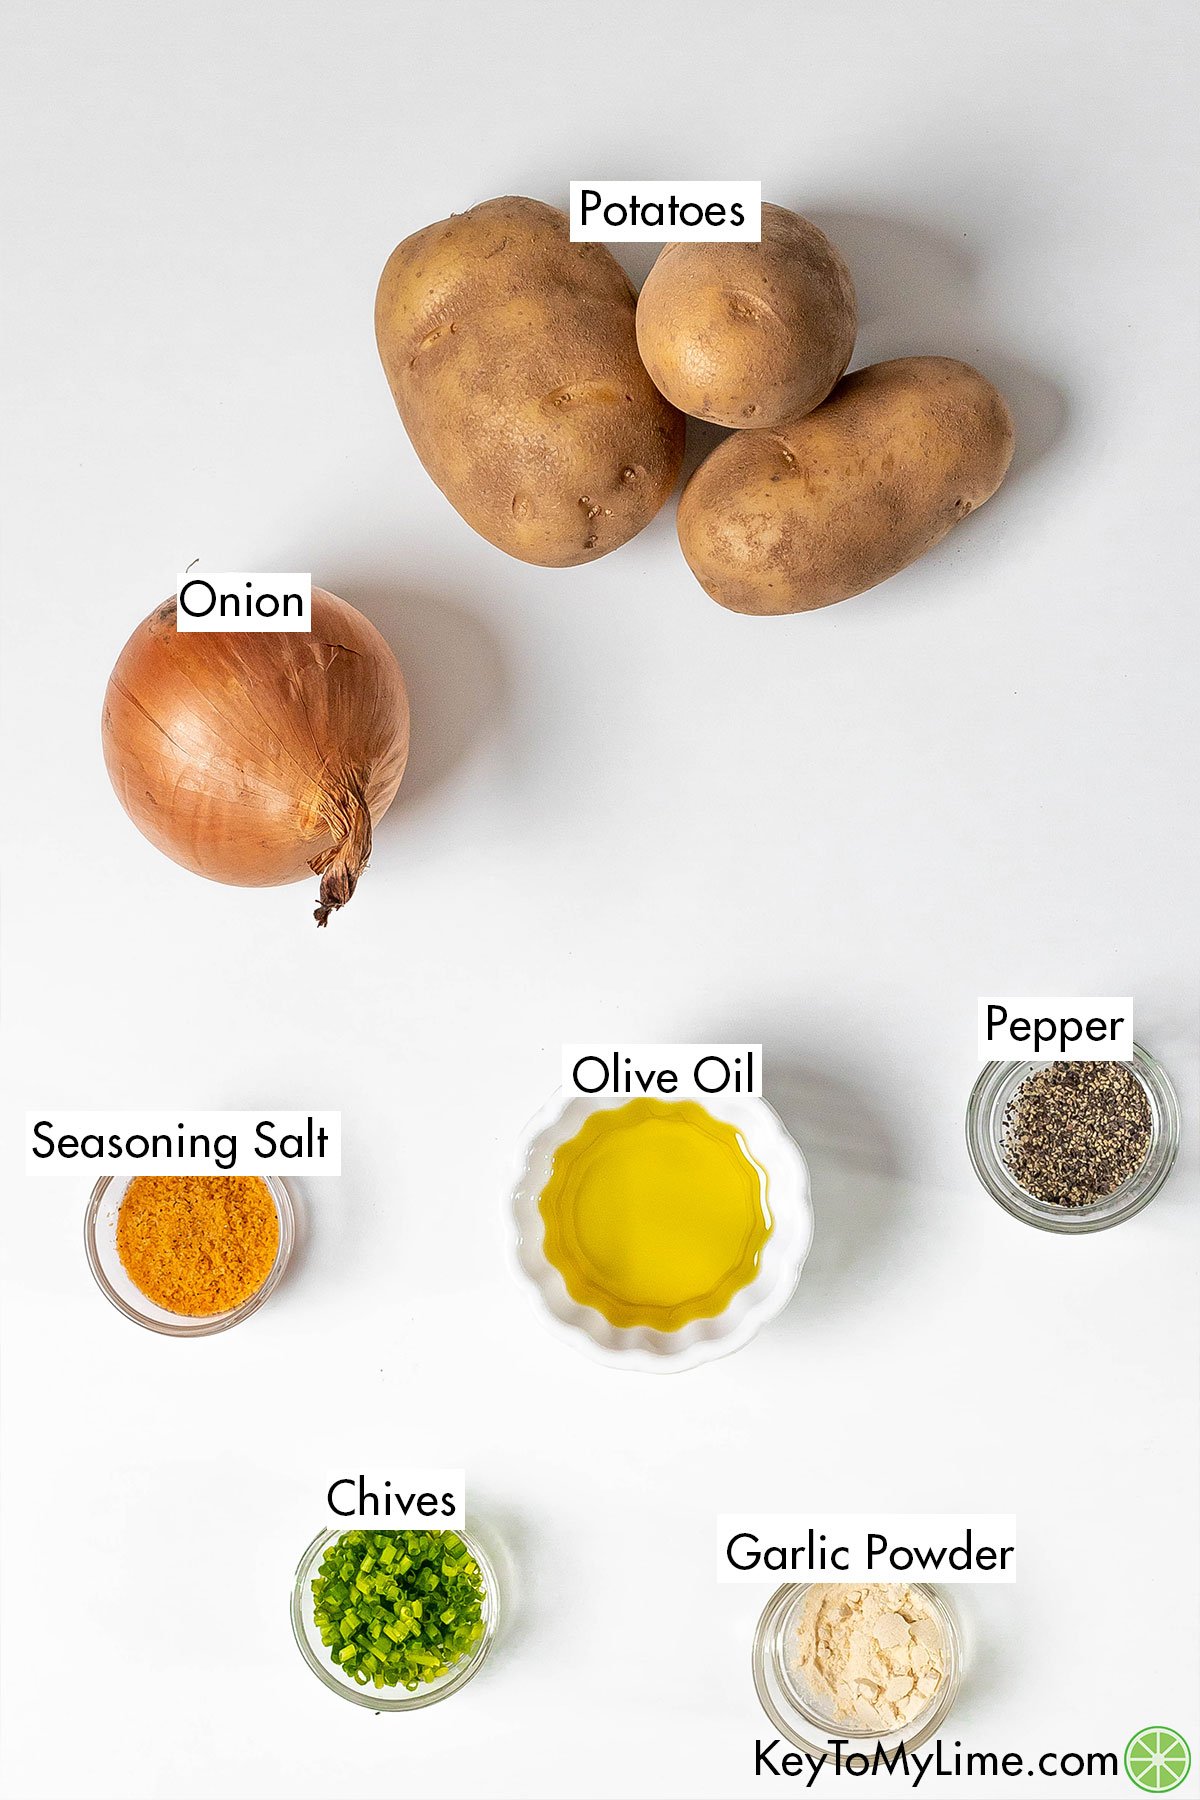 The labeled ingredients for fried potatoes and onions.